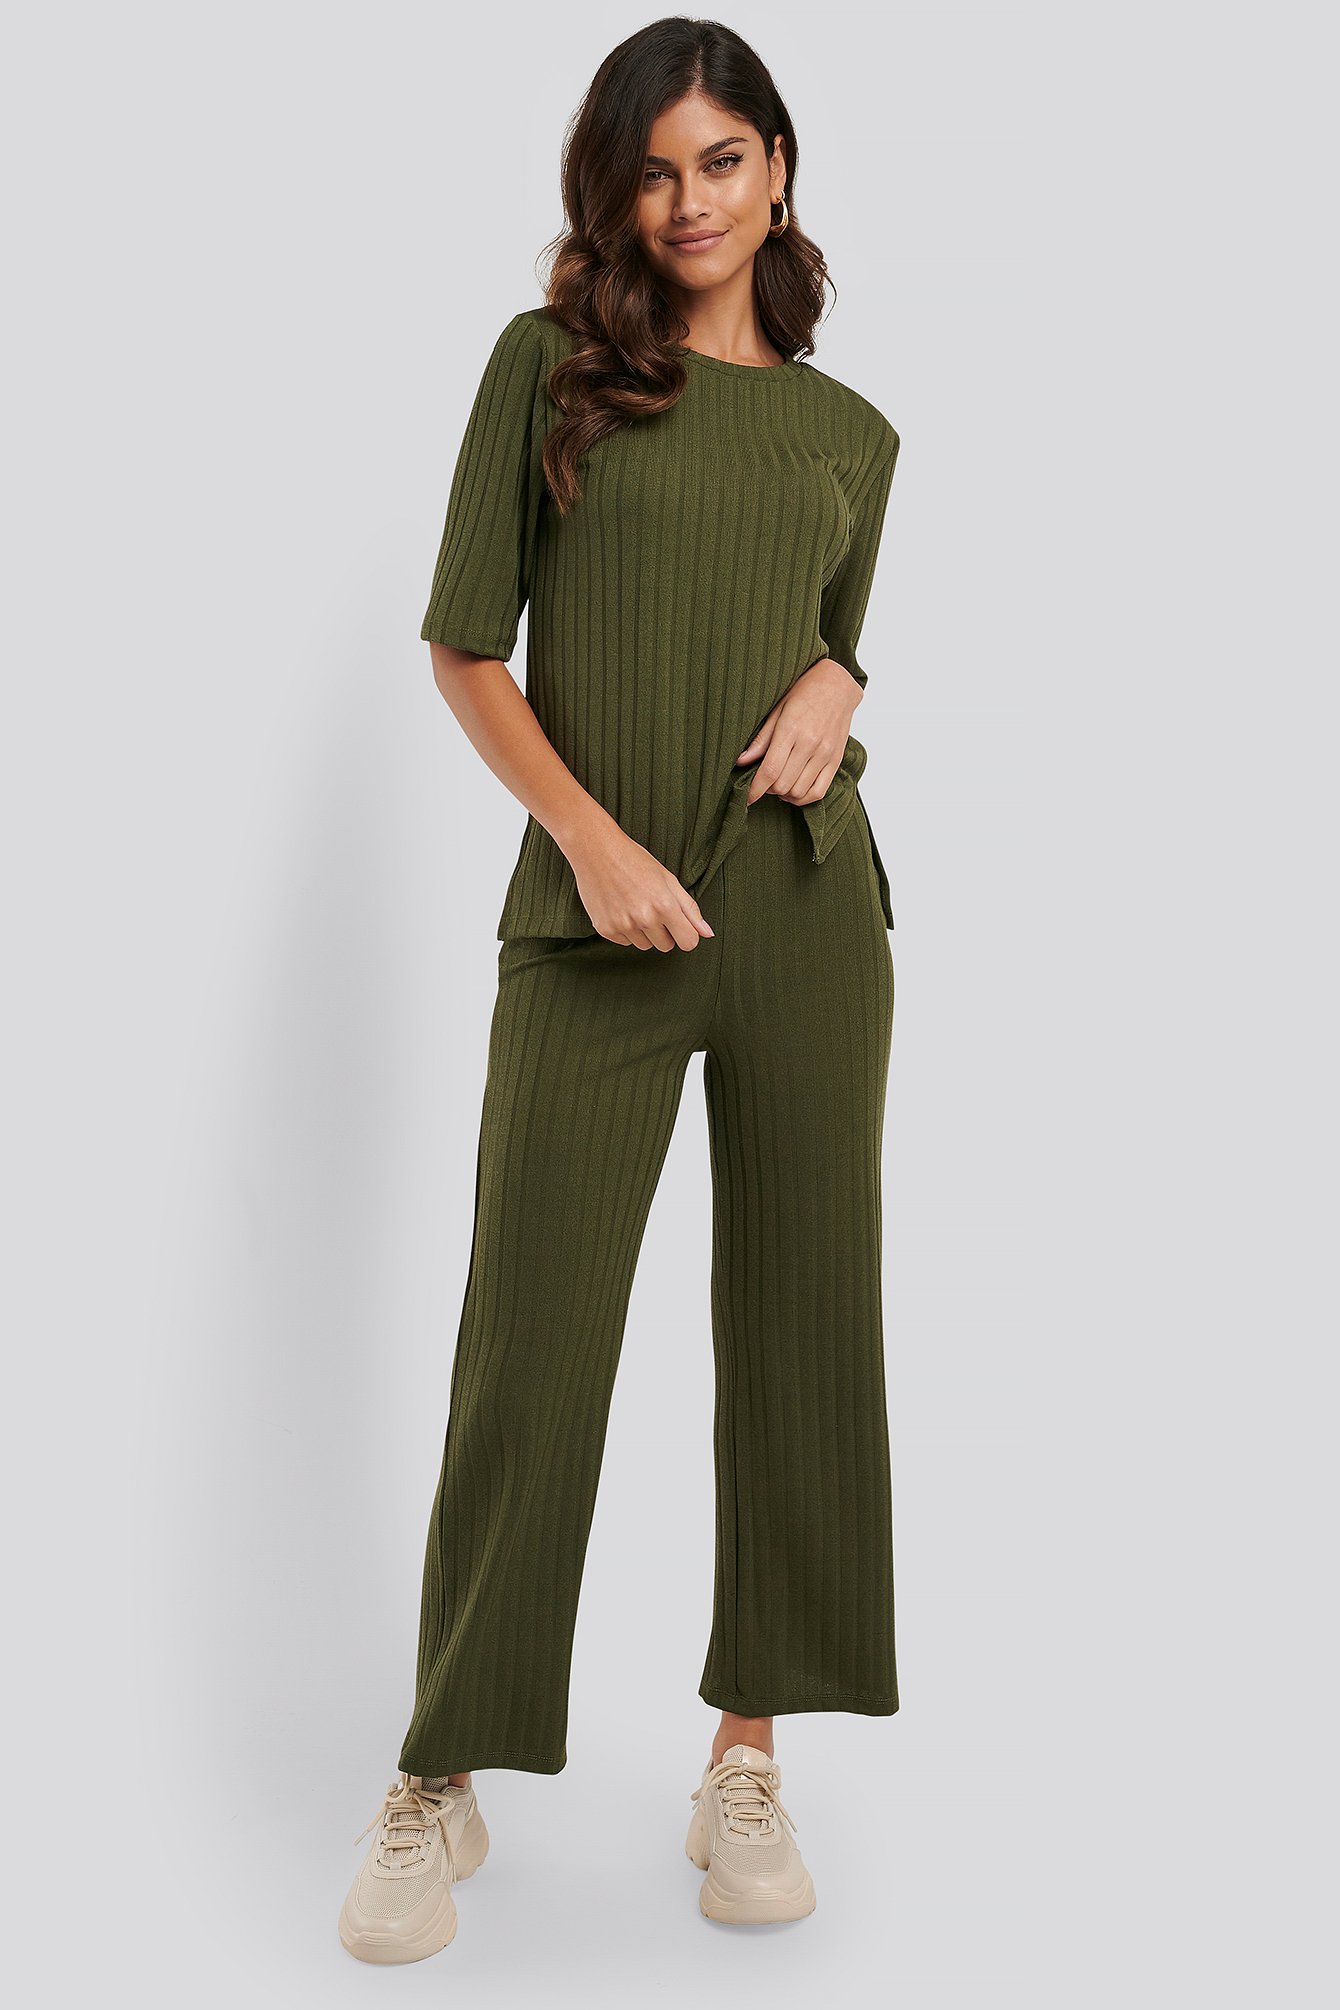 Army Green Wide Rib Loose Fit Pants